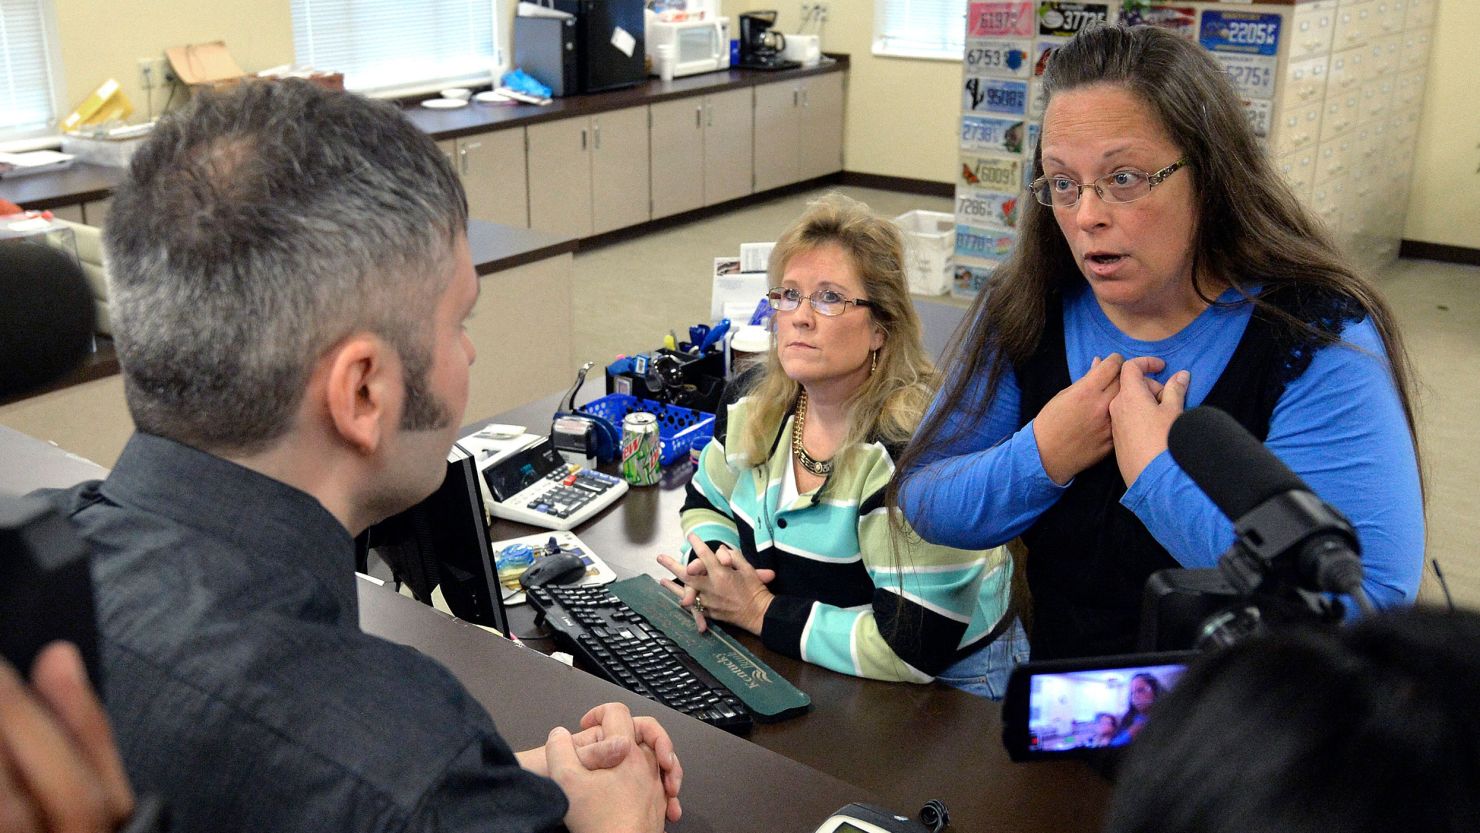 In 2015, Rowan County Clerk Kim Davis talks with David Moore following her office's refusal to issue a same-sex marriage license.